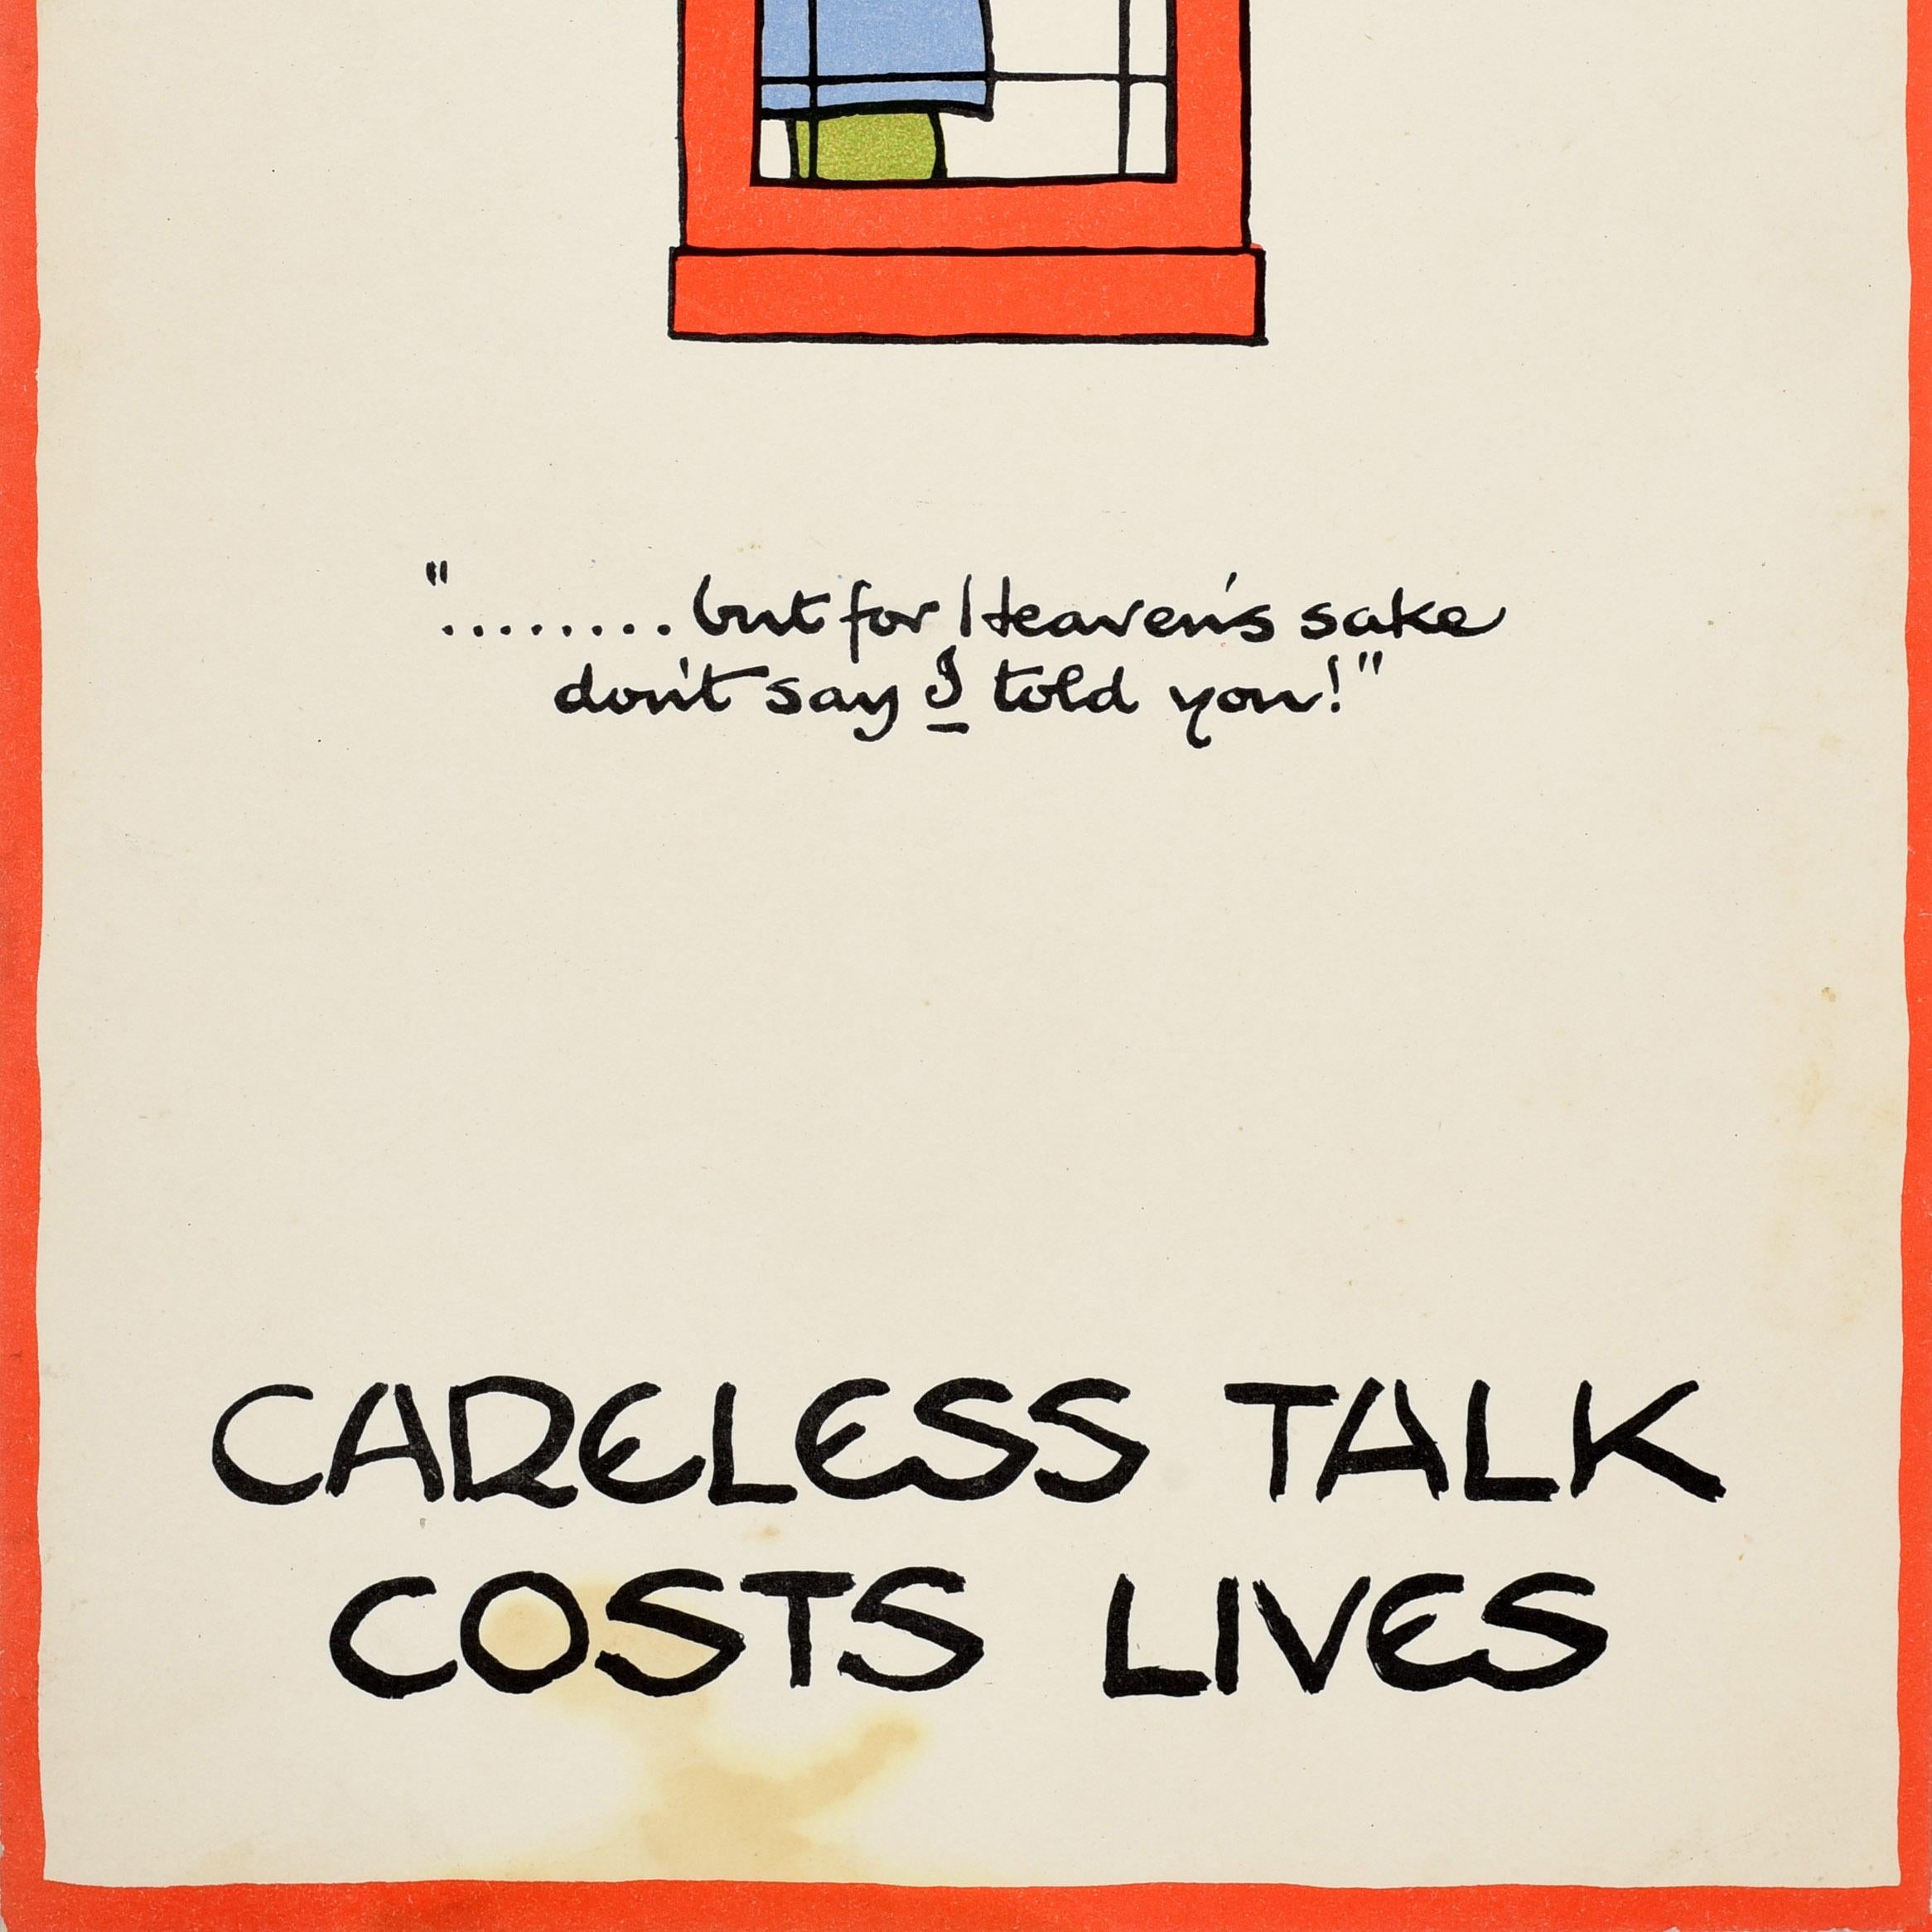 Original vintage World War Two poster by the notable British cartoonist and illustrator Fougasse (Cyril Kenneth Bird; 1887-1965) from the popular and iconic Careless Talk Costs Lives wartime propaganda series issued by the Ministry of Information -